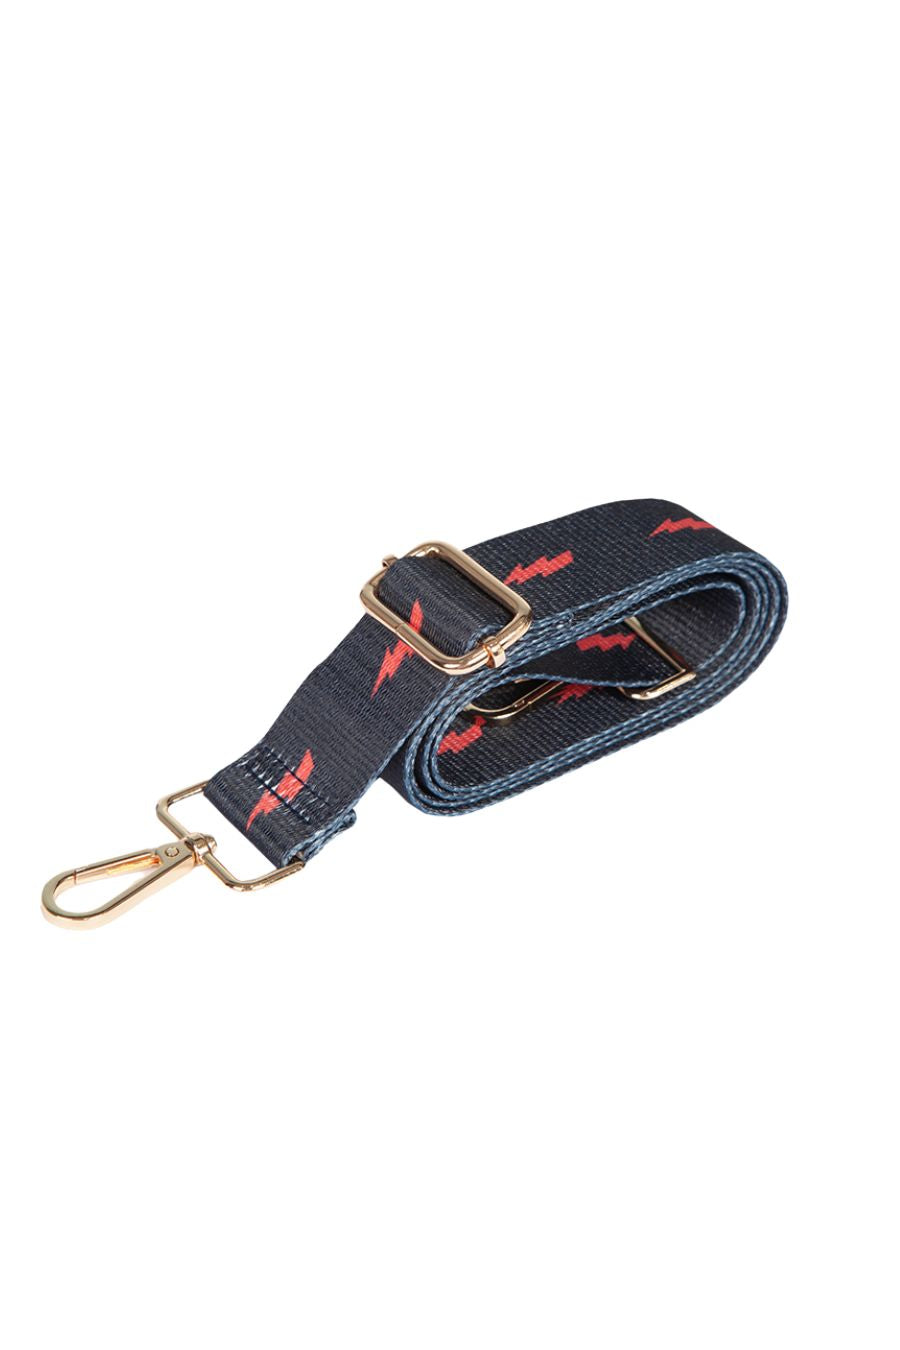 navy blue crossbody bag strap with red lightning bolt pattern. adjustable strap with gold clip on hardware